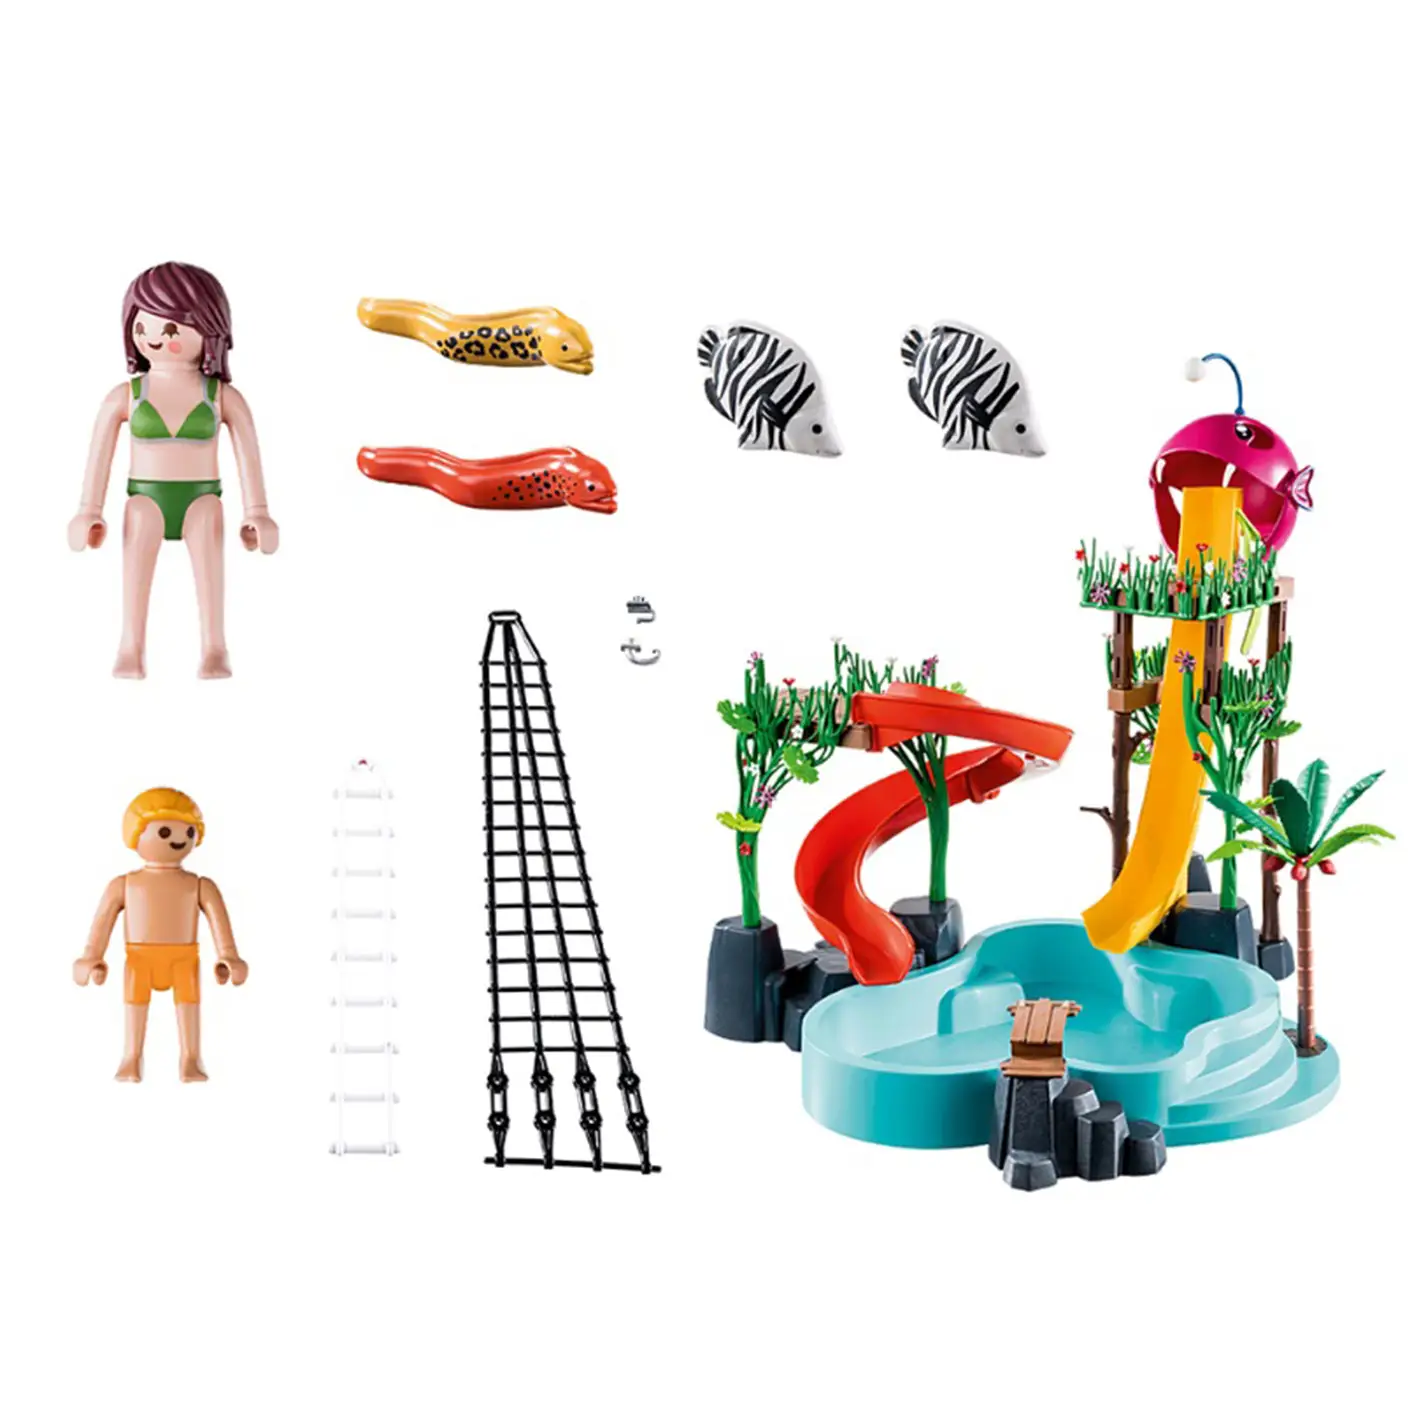 Playmobil Family Fun - Water Park with Slides 70609 (For